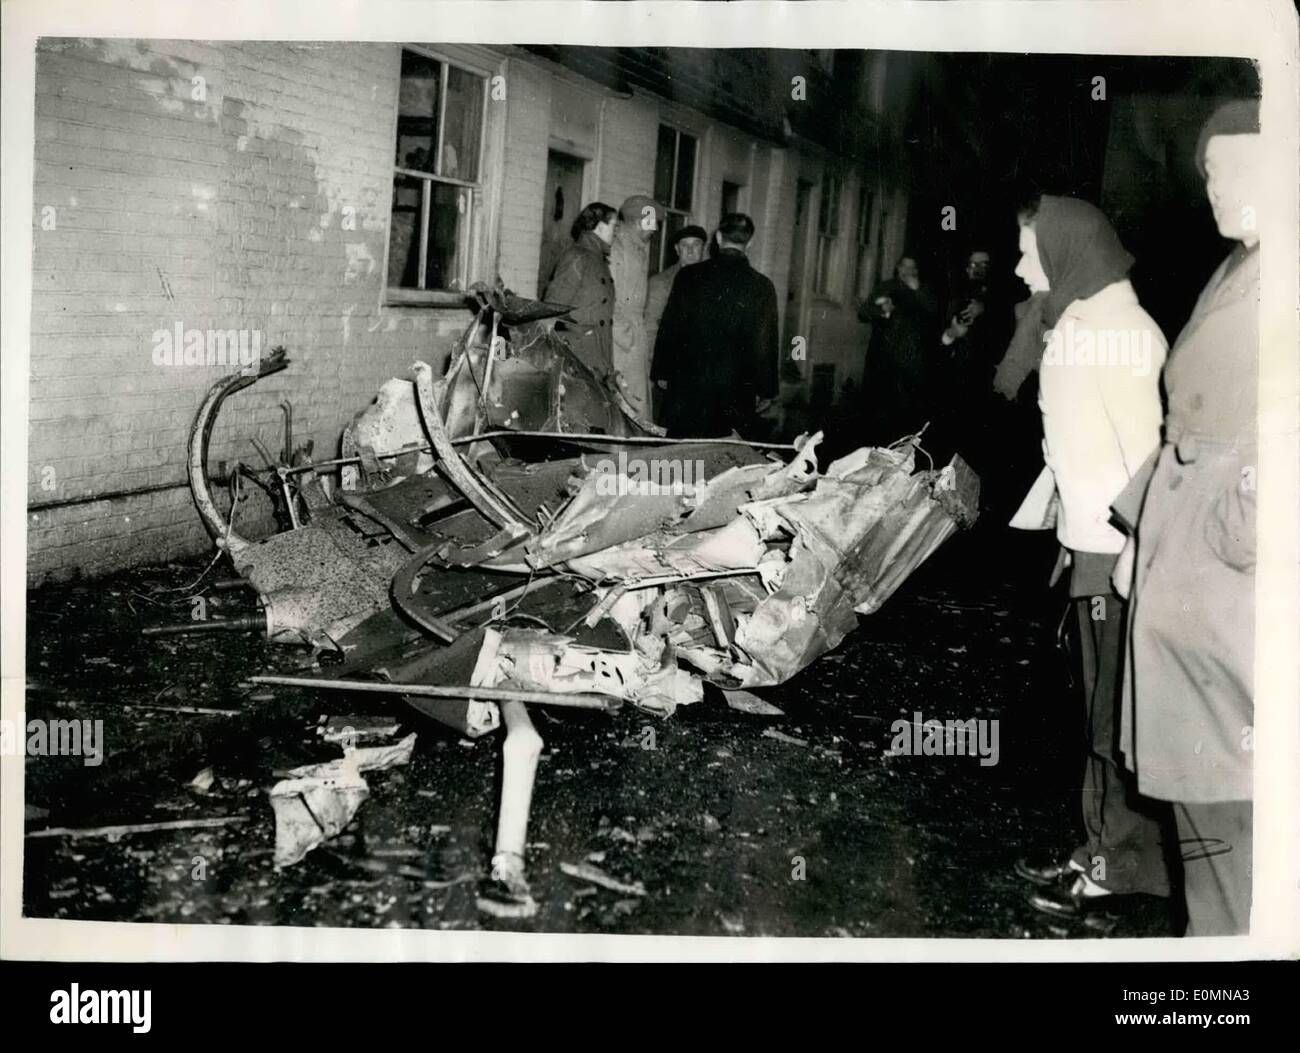 Jan. 01, 1956 - R.A.F PLANE CRASHES IN VILLAGE HIGH STREET.. PART OF THE WRECKAGE. At least one person was killed and a number were injured when an R.A.F. plane crashed this afternoon in the High Street at Wadhurst, Sussex.. A hotel and number of shops were damaged.. The plane burst into flames.. Keystone Photo Shows:- Part of the aircraft wreckage in center of the Village Street of Wadhurst this evening. Stock Photo